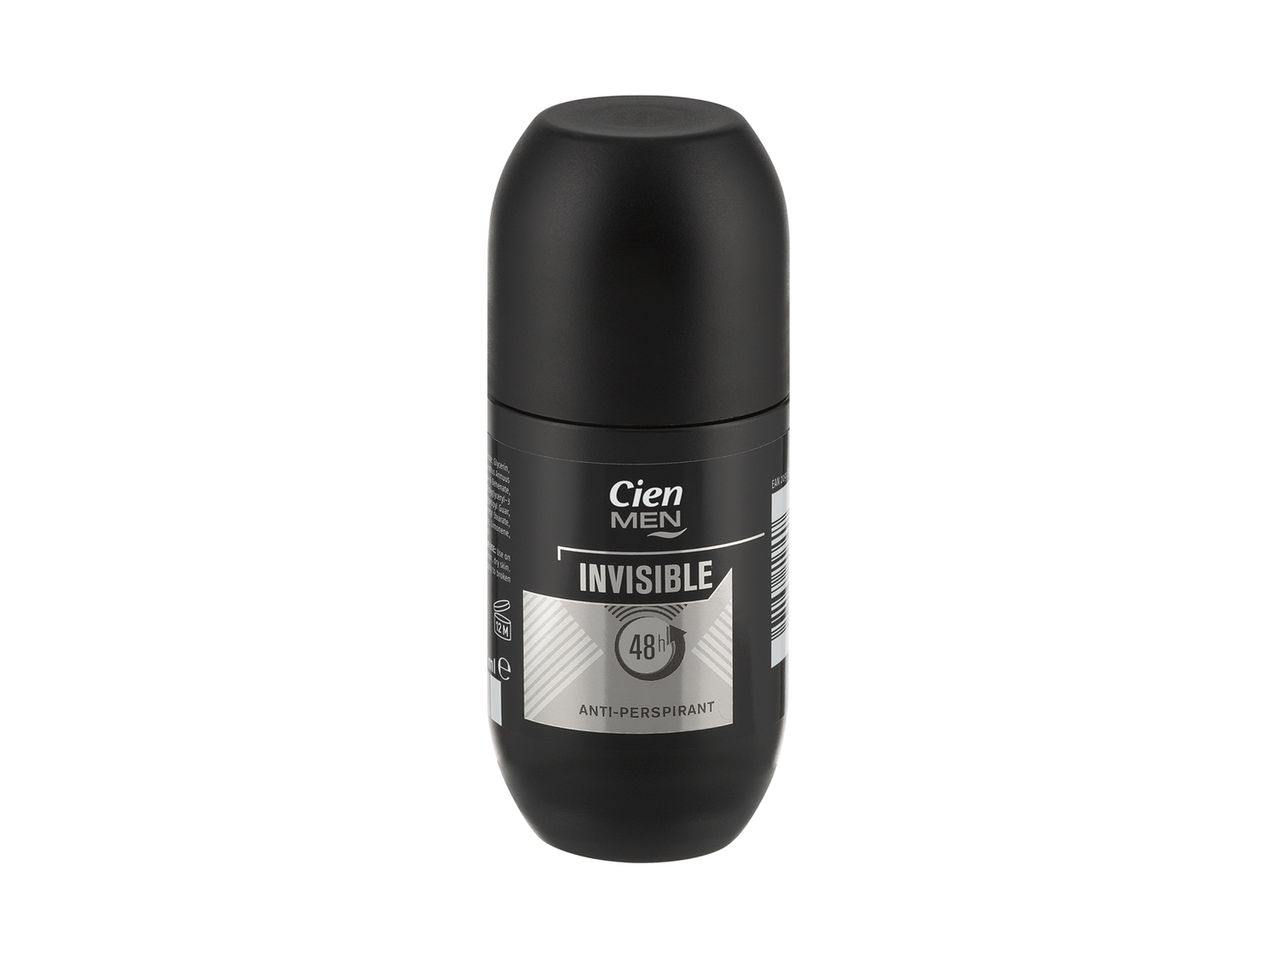 Go to full screen view: Cien Roll On Deodorant for Men - Image 2